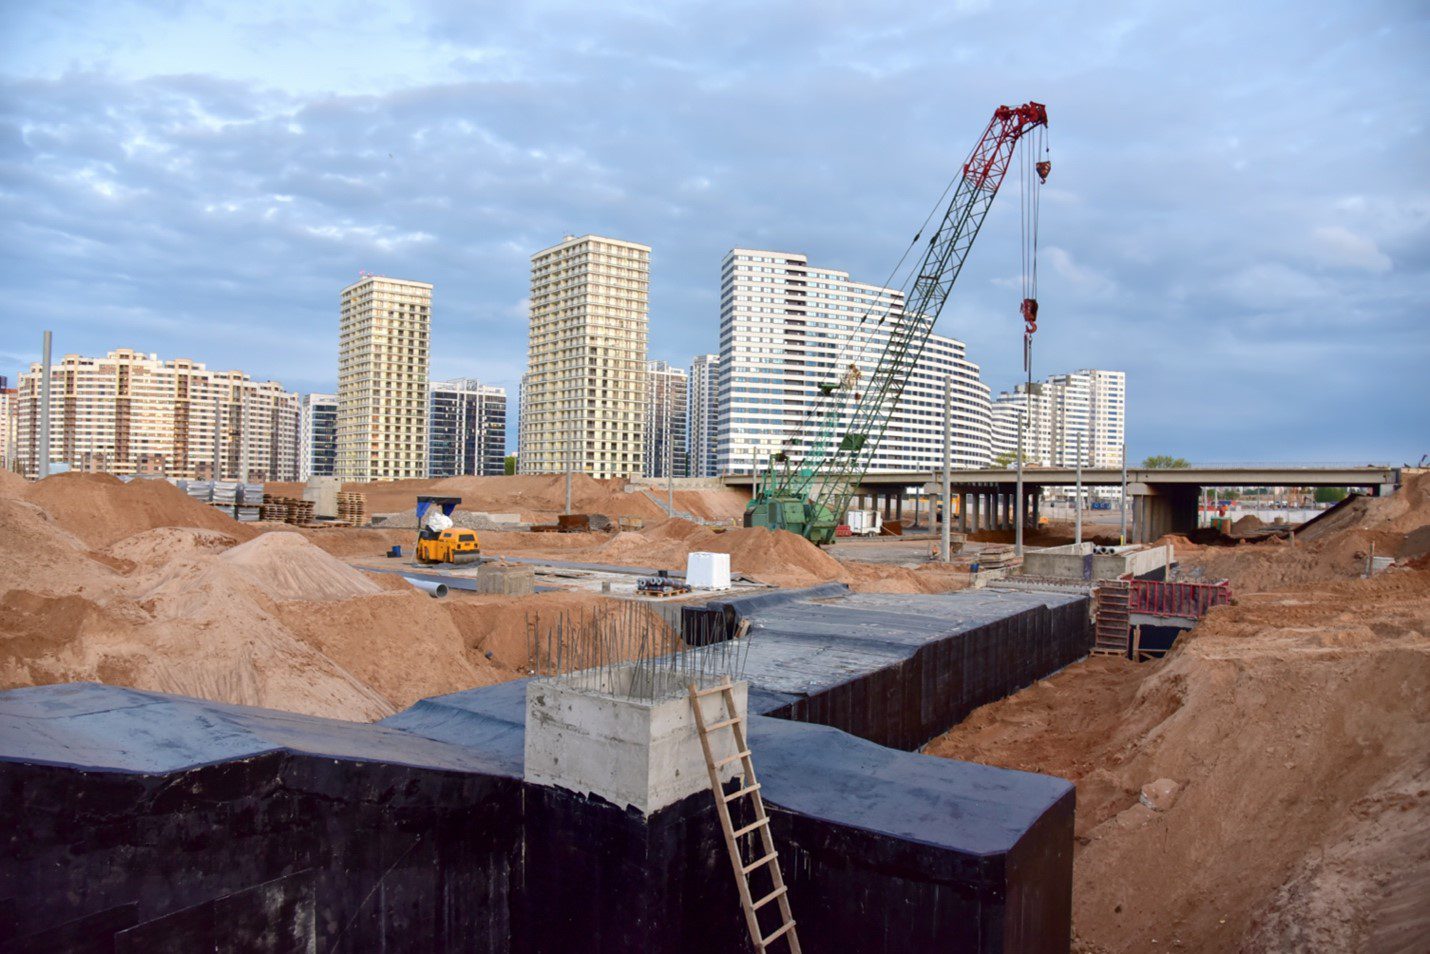 A construction site with many buildings and cranes.